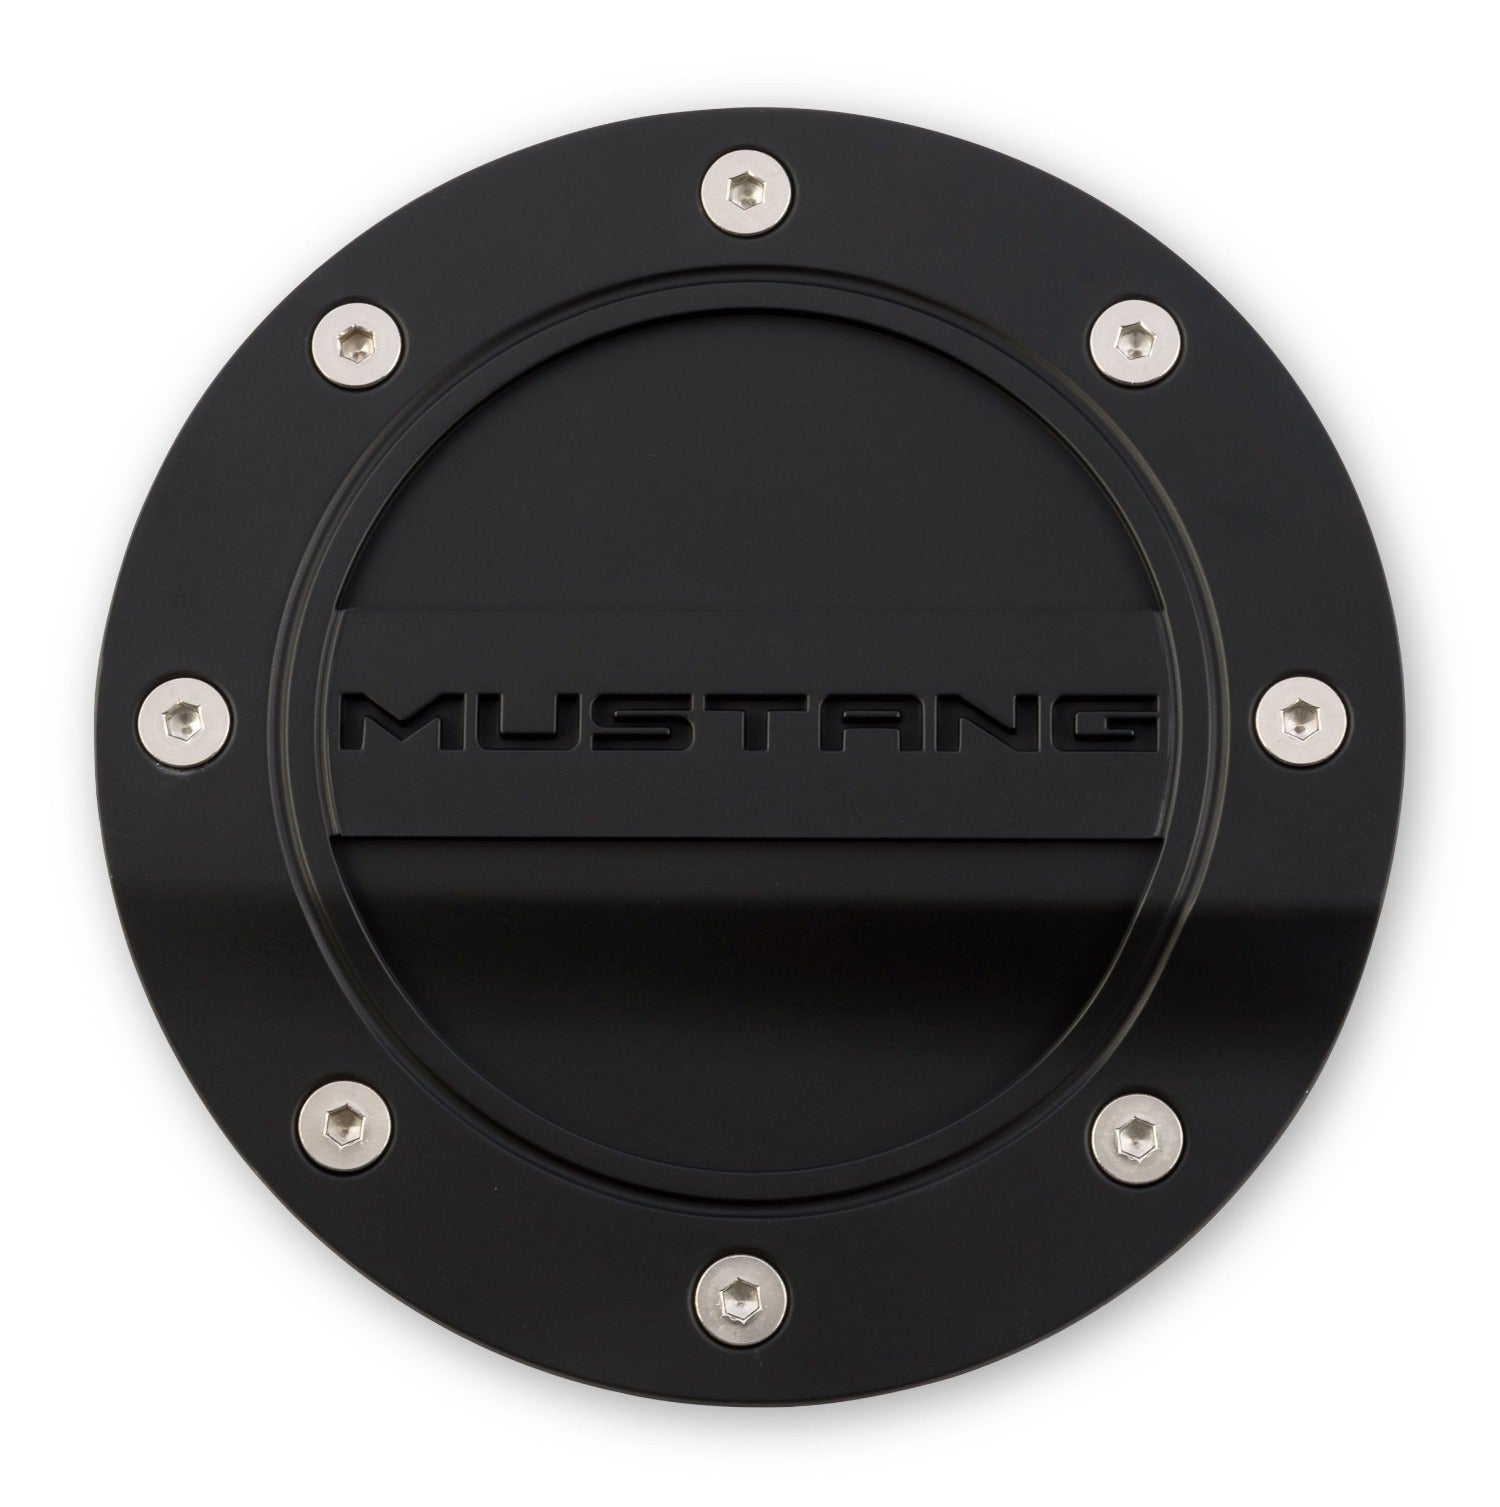 DRAKE Fuel Door (Black, feat. Mustang) for Mustang 2015-23 | #FR3Z-6640526-MA - Available from NEMESISUK.COM